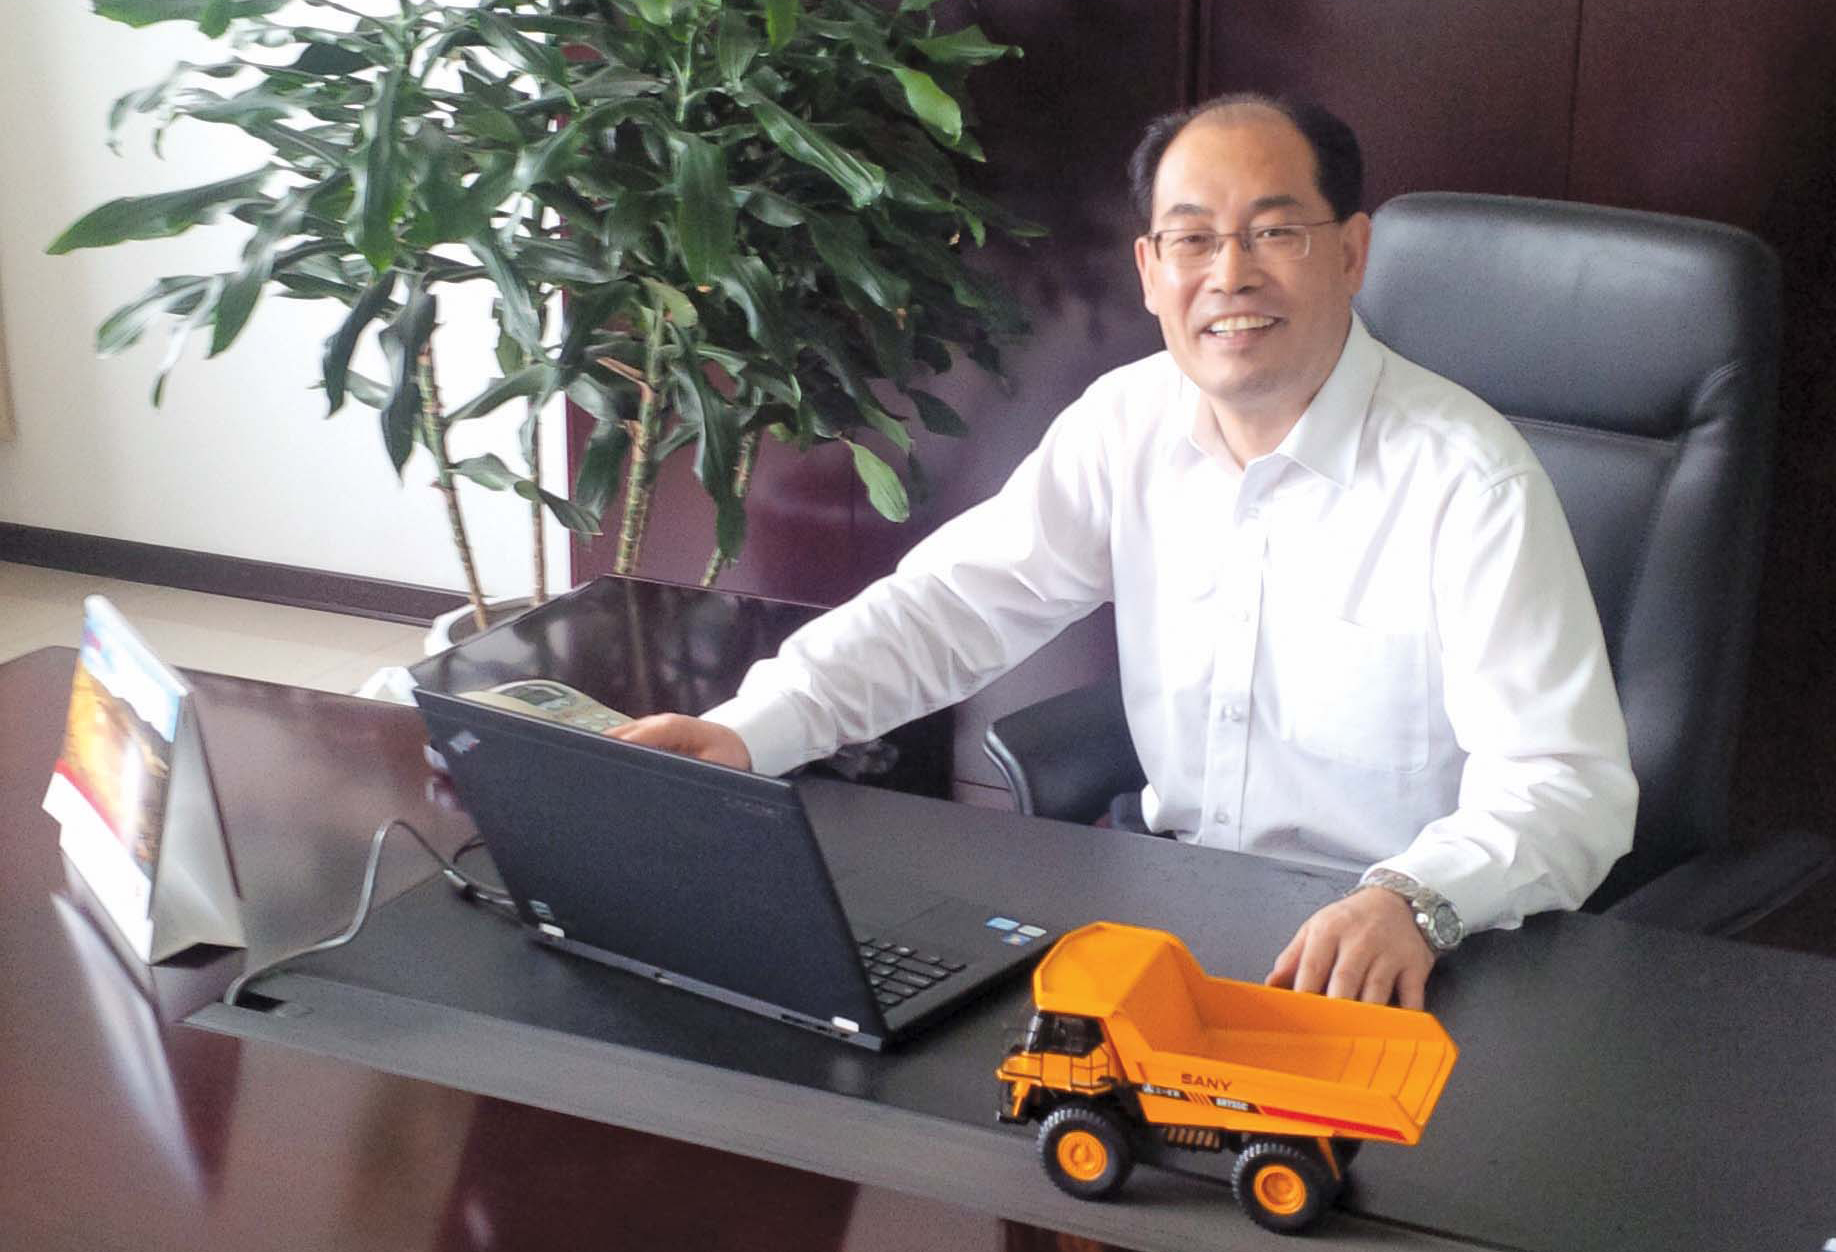 Zhichun Cao, general manager of Sany Mining Equipment